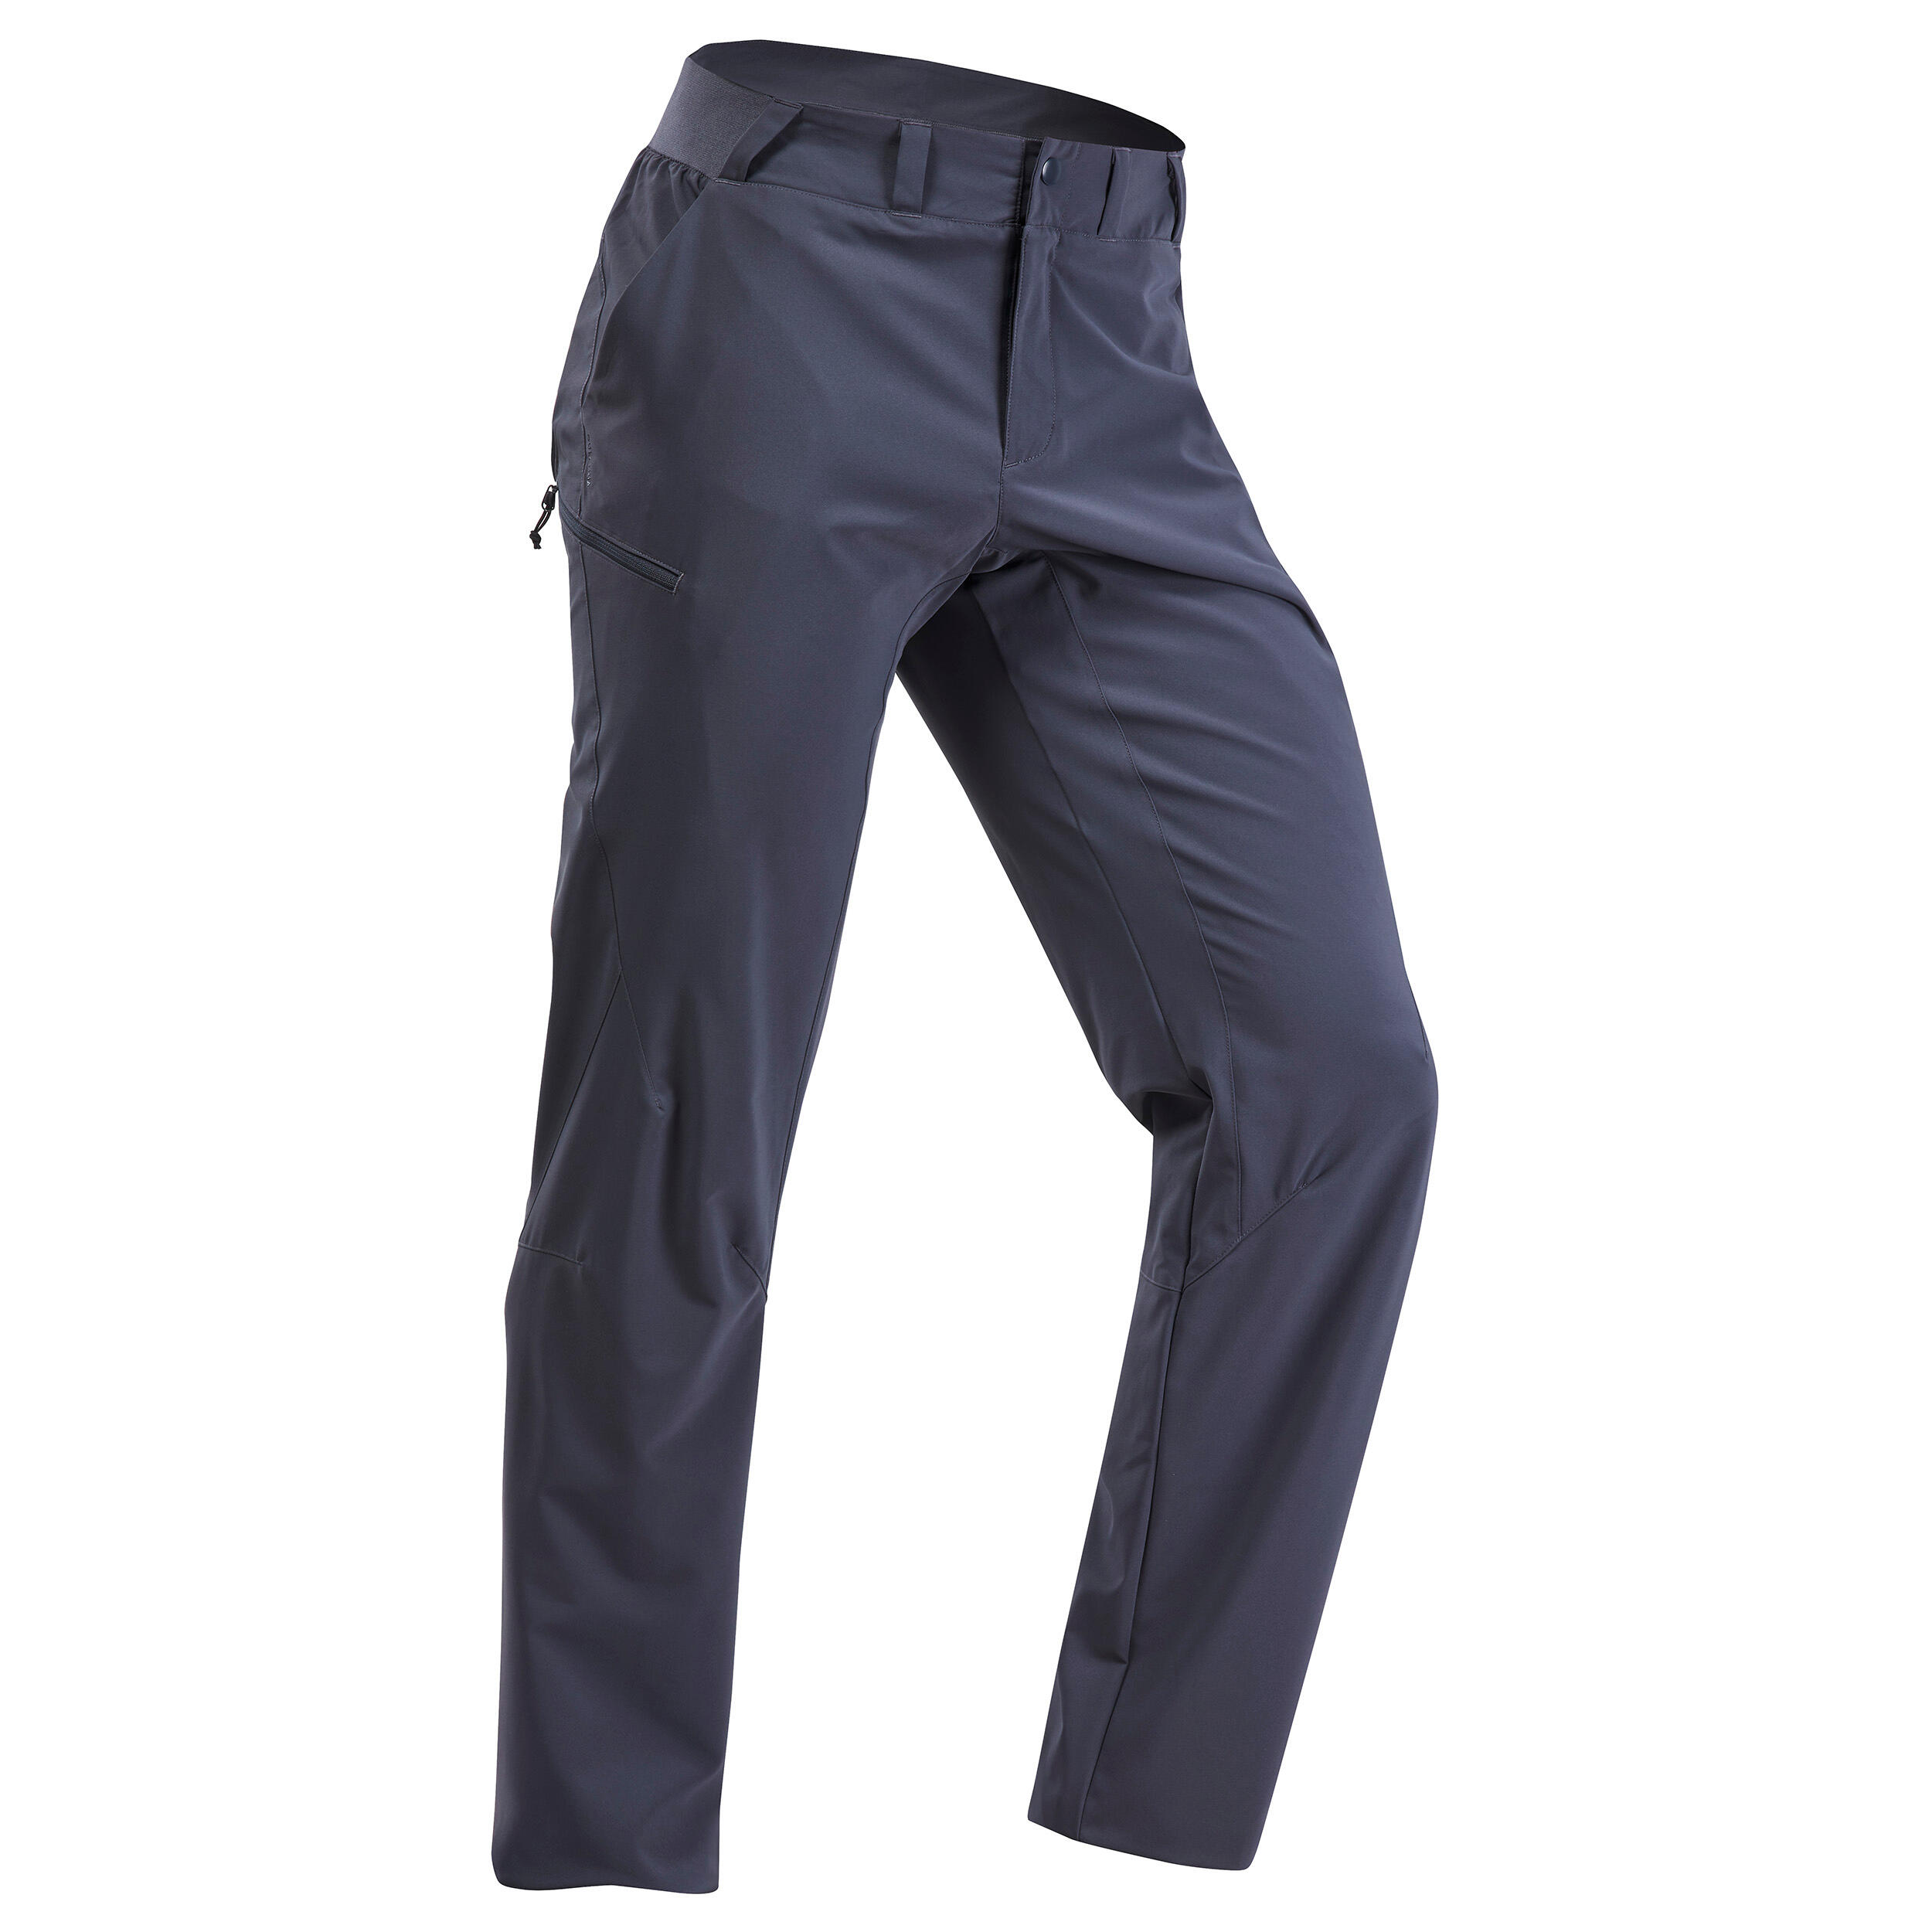 Men's Hiking Trousers MH100 - Grey